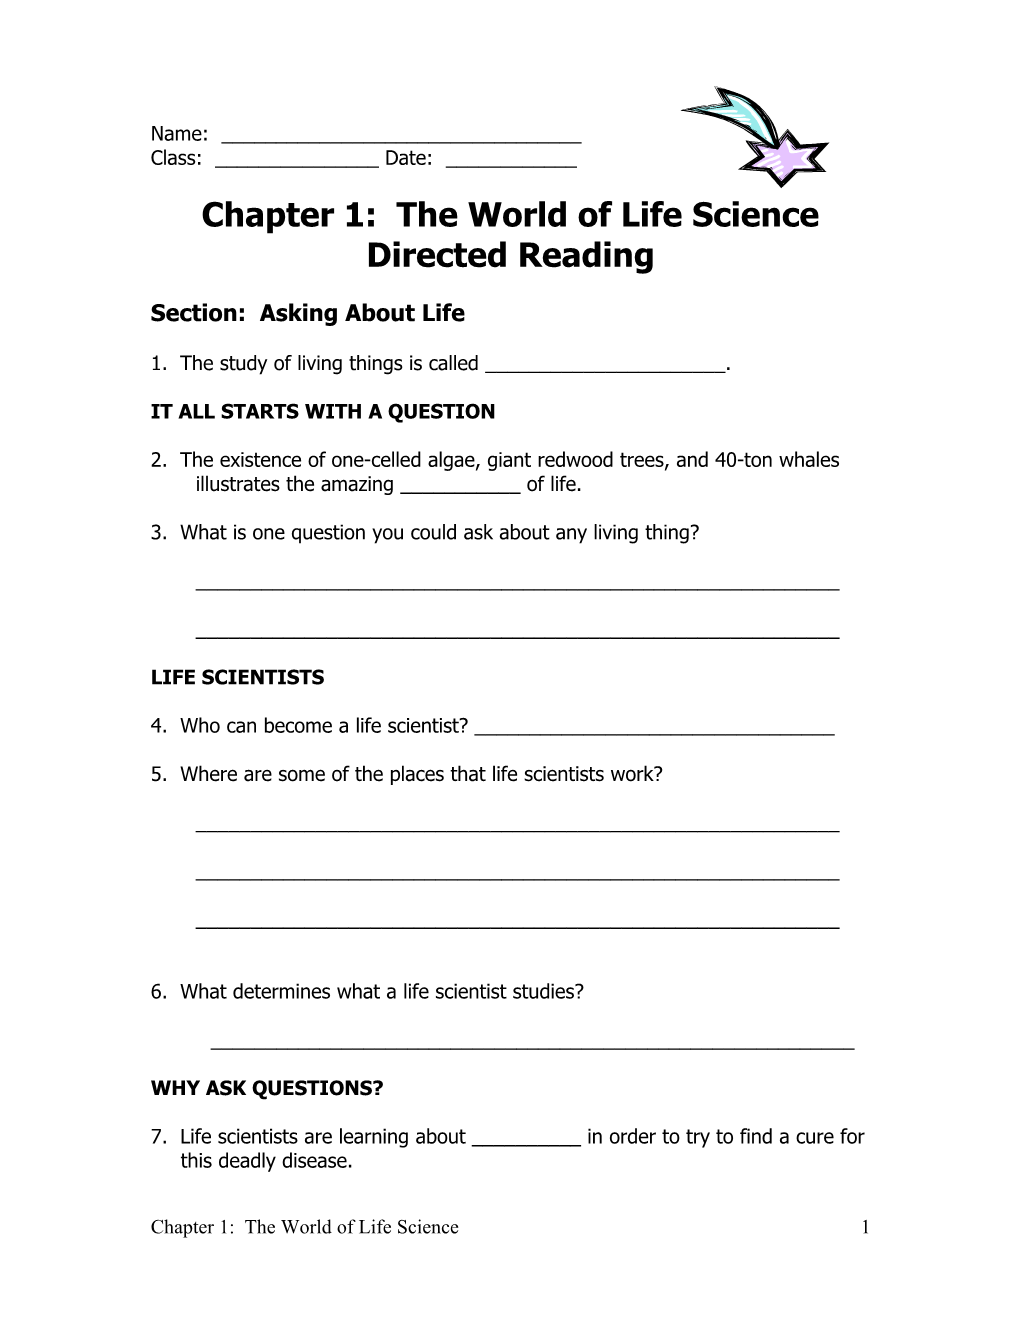 Chapter 1: the World of Life Science